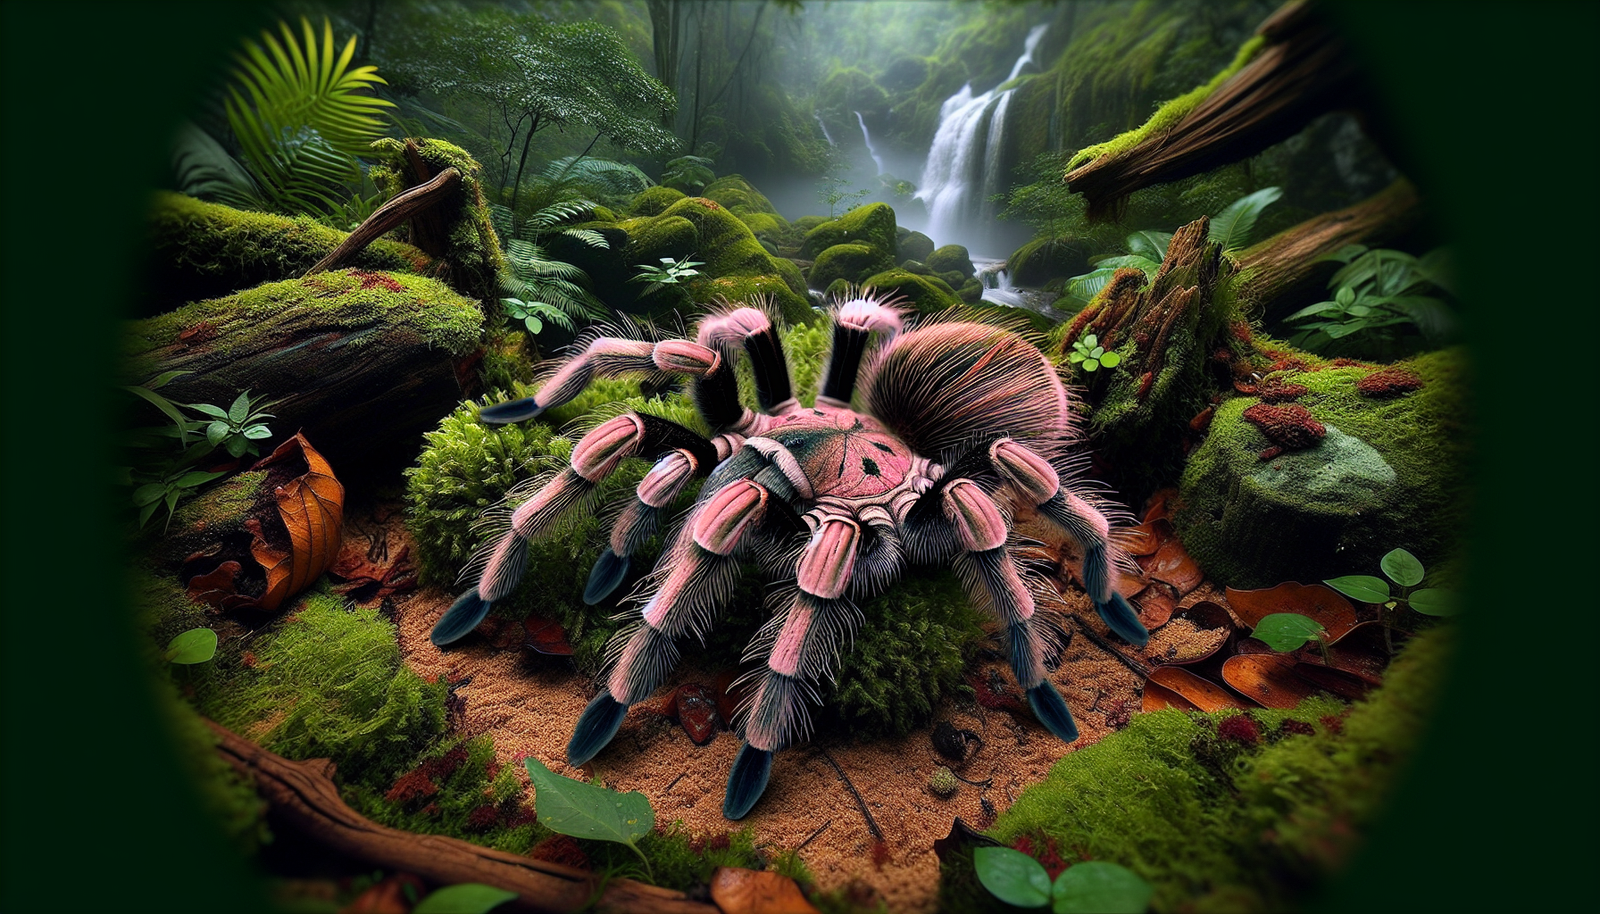 What Is The Natural Range Of The Strikingly Marked Brazilian Pink Bloom Tarantula?